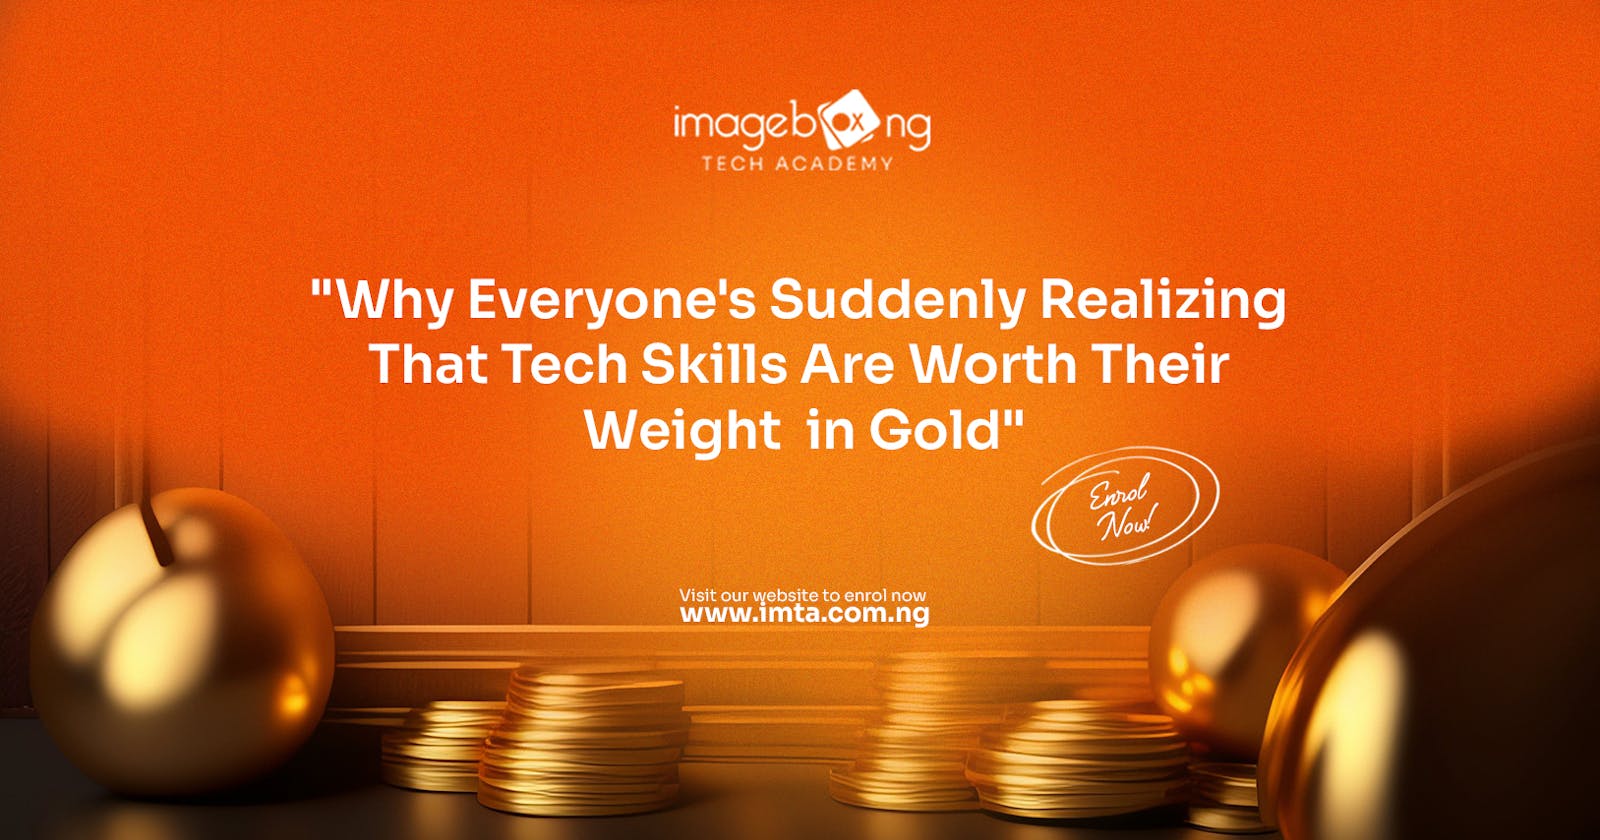 "Why Everyone's Suddenly Realizing That Tech Skills Are Worth Their Weight in Gold"